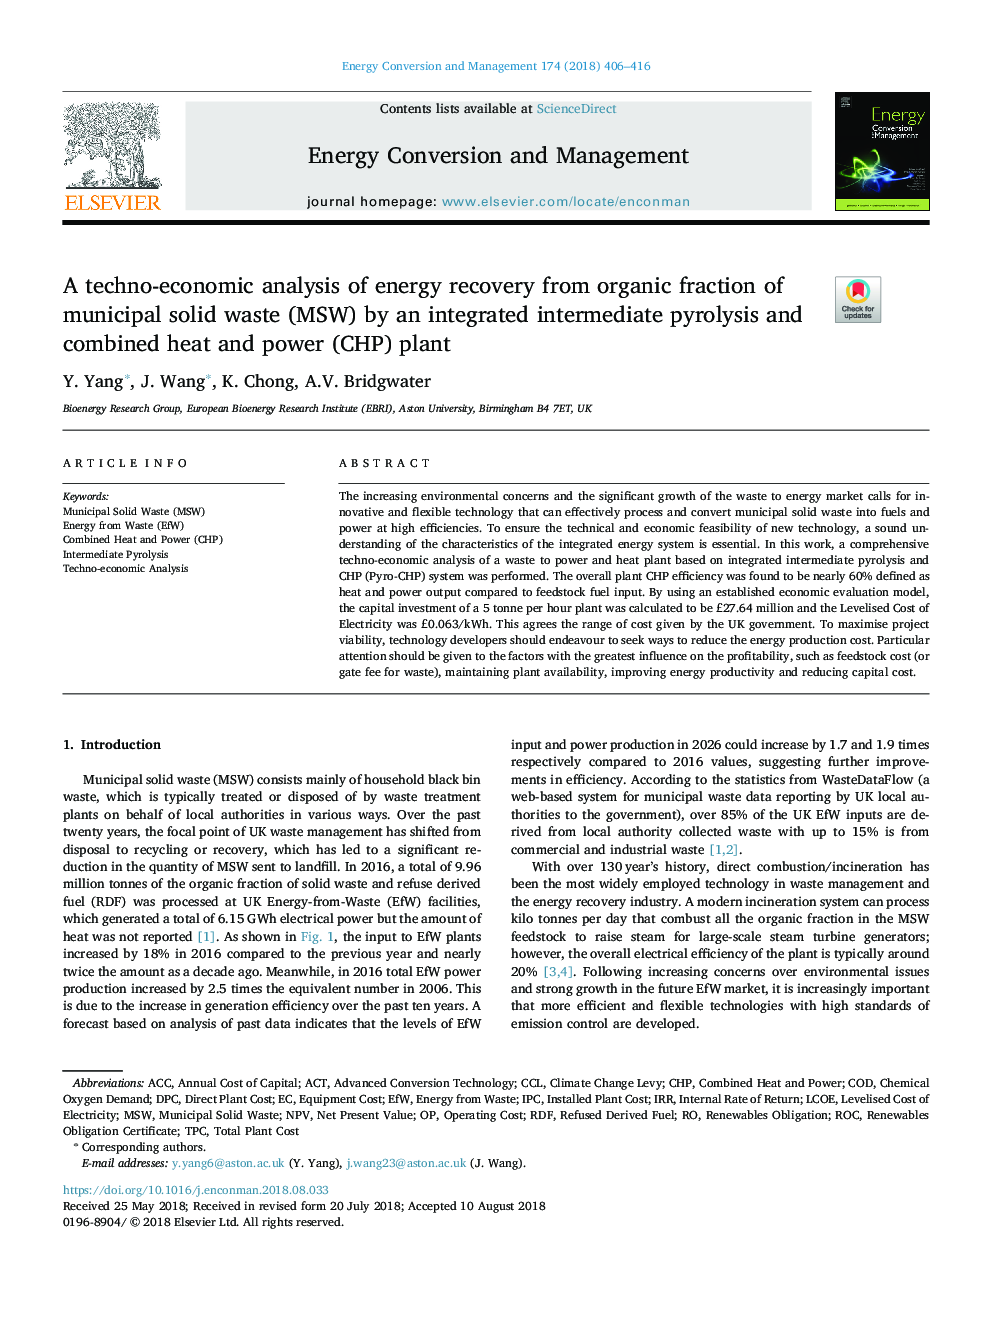 A techno-economic analysis of energy recovery from organic fraction of municipal solid waste (MSW) by an integrated intermediate pyrolysis and combined heat and power (CHP) plant